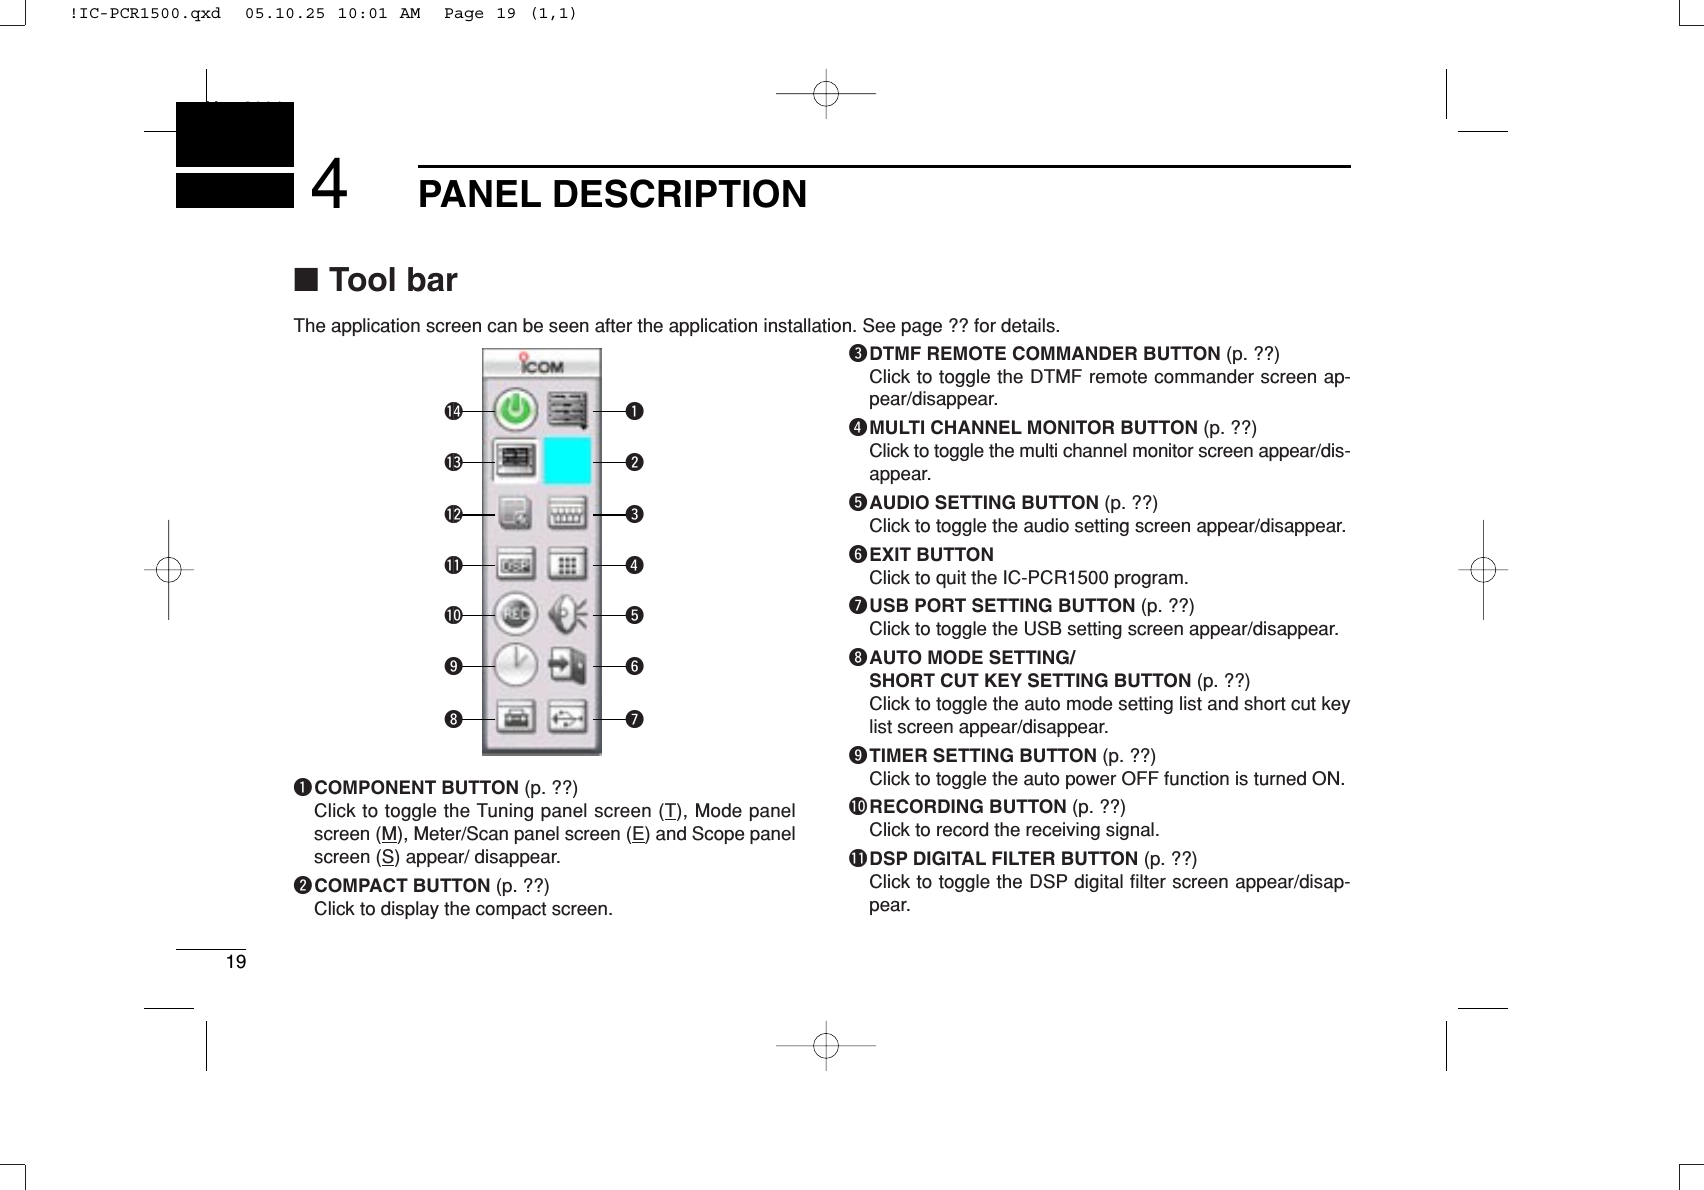 19PANEL DESCRIPTIONNew20014qCOMPONENT BUTTON (p. ??)Click to toggle the Tuning panel screen (T), Mode panelscreen (M), Meter/Scan panel screen (E) and Scope panelscreen (S) appear/ disappear.wCOMPACT BUTTON (p. ??)Click to display the compact screen.eDTMF REMOTE COMMANDER BUTTON (p. ??)Click to toggle the DTMF remote commander screen ap-pear/disappear.rMULTI CHANNEL MONITOR BUTTON (p. ??)Click to toggle the multi channel monitor screen appear/dis-appear.tAUDIO SETTING BUTTON (p. ??)Click to toggle the audio setting screen appear/disappear.yEXIT BUTTONClick to quit the IC-PCR1500 program.uUSB PORT SETTING BUTTON (p. ??)Click to toggle the USB setting screen appear/disappear.iAUTO MODE SETTING/SHORT CUT KEY SETTING BUTTON (p. ??)Click to toggle the auto mode setting list and short cut keylist screen appear/disappear.oTIMER SETTING BUTTON (p. ??)Click to toggle the auto power OFF function is turned ON.!0RECORDING BUTTON (p. ??)Click to record the receiving signal.!1DSP DIGITAL FILTER BUTTON (p. ??)Click to toggle the DSP digital ﬁlter screen appear/disap-pear.!0oi!1!2!3!4 qwertyu■Tool barThe application screen can be seen after the application installation. See page ?? for details.!IC-PCR1500.qxd  05.10.25 10:01 AM  Page 19 (1,1)